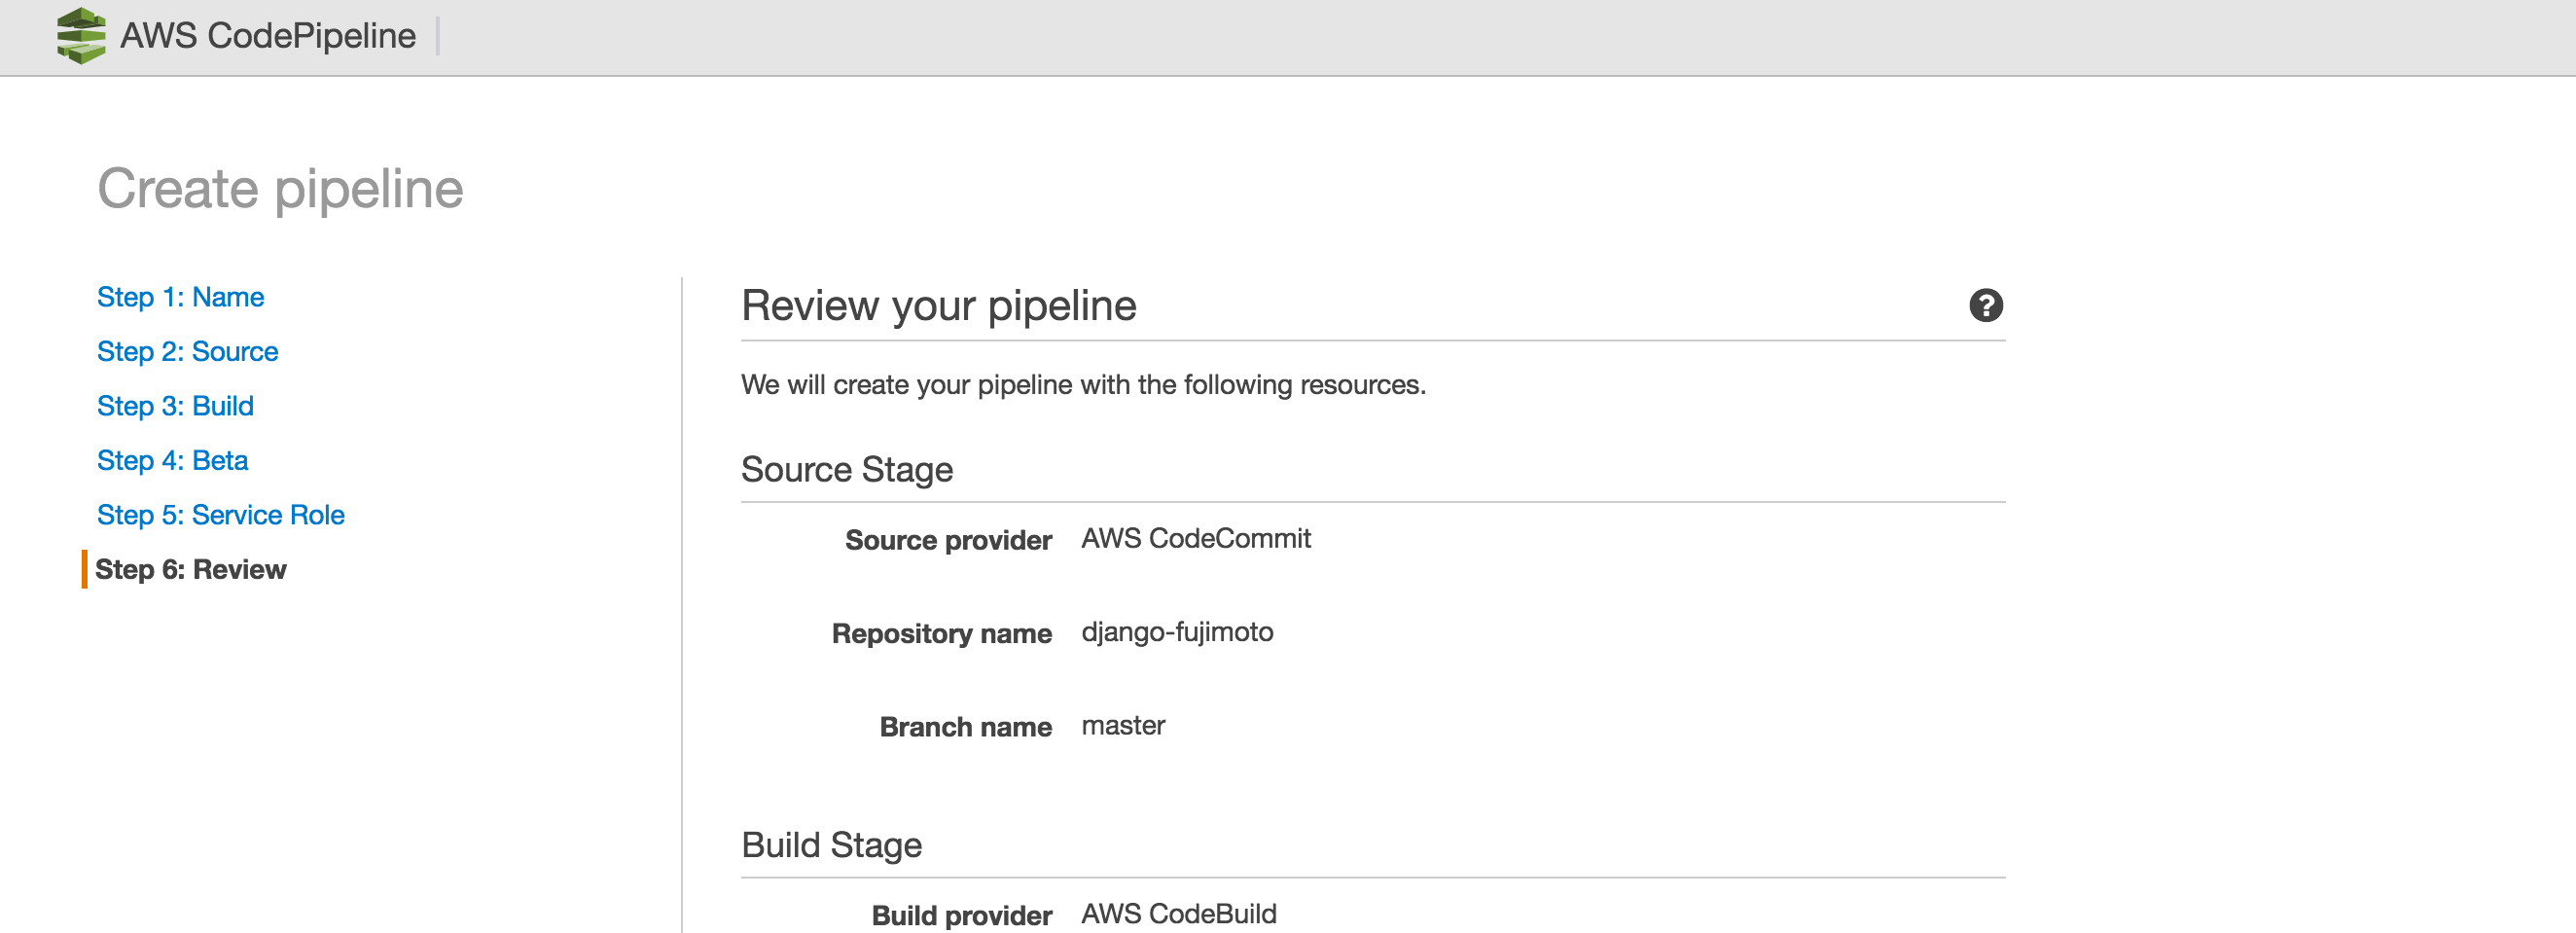 AWS_CodePipeline_Management_Console 8